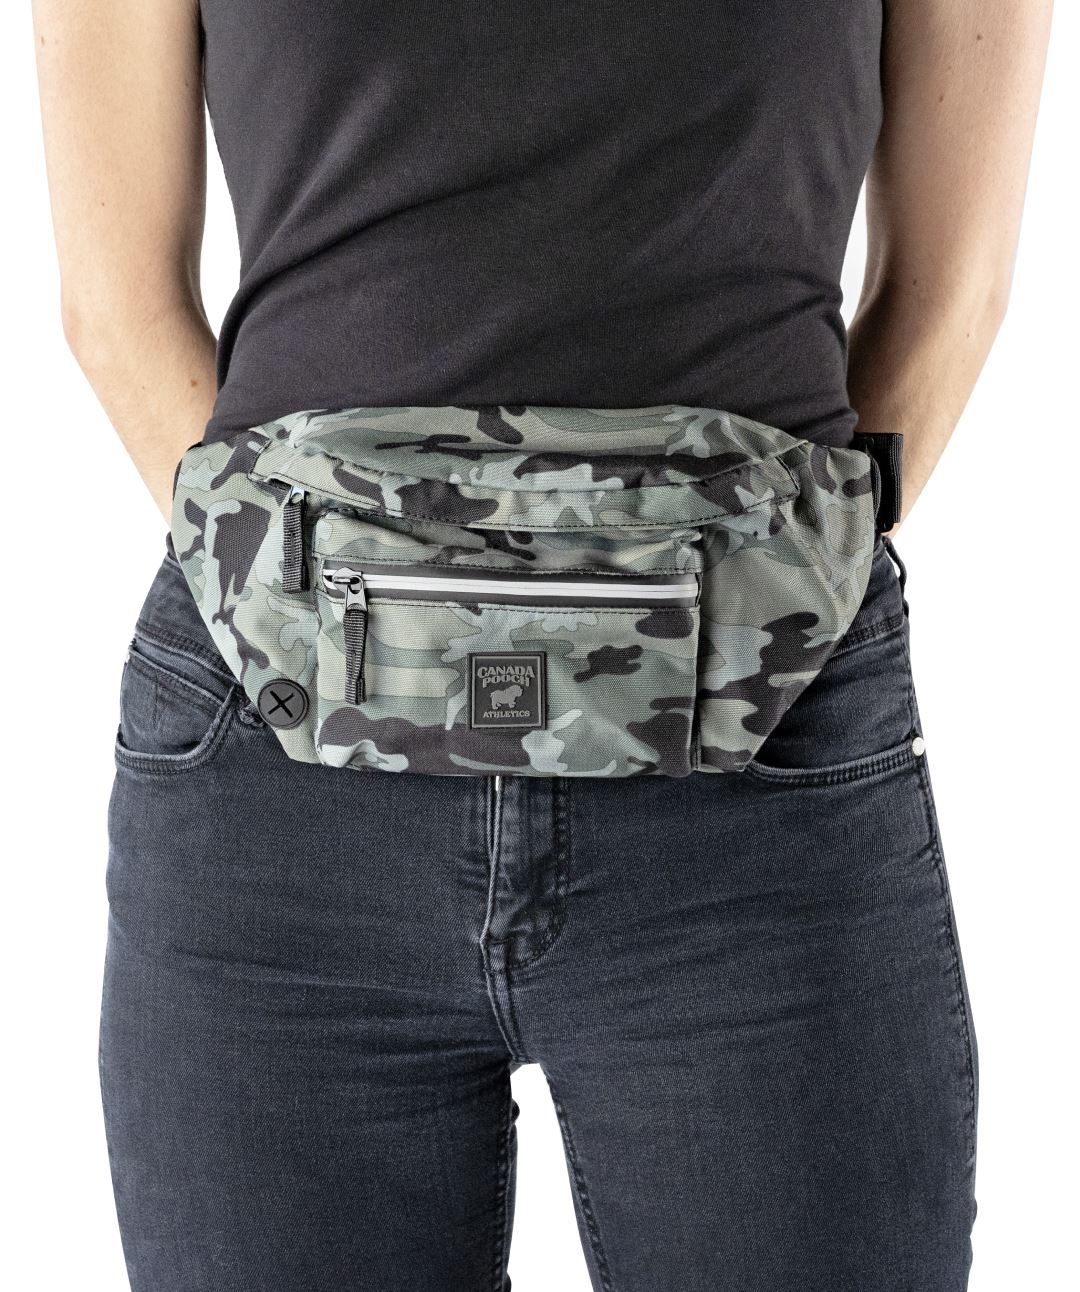 Canada Pooch The Everything Fanny Pack Poop Bag Holder Canada Pooch Green Camo 